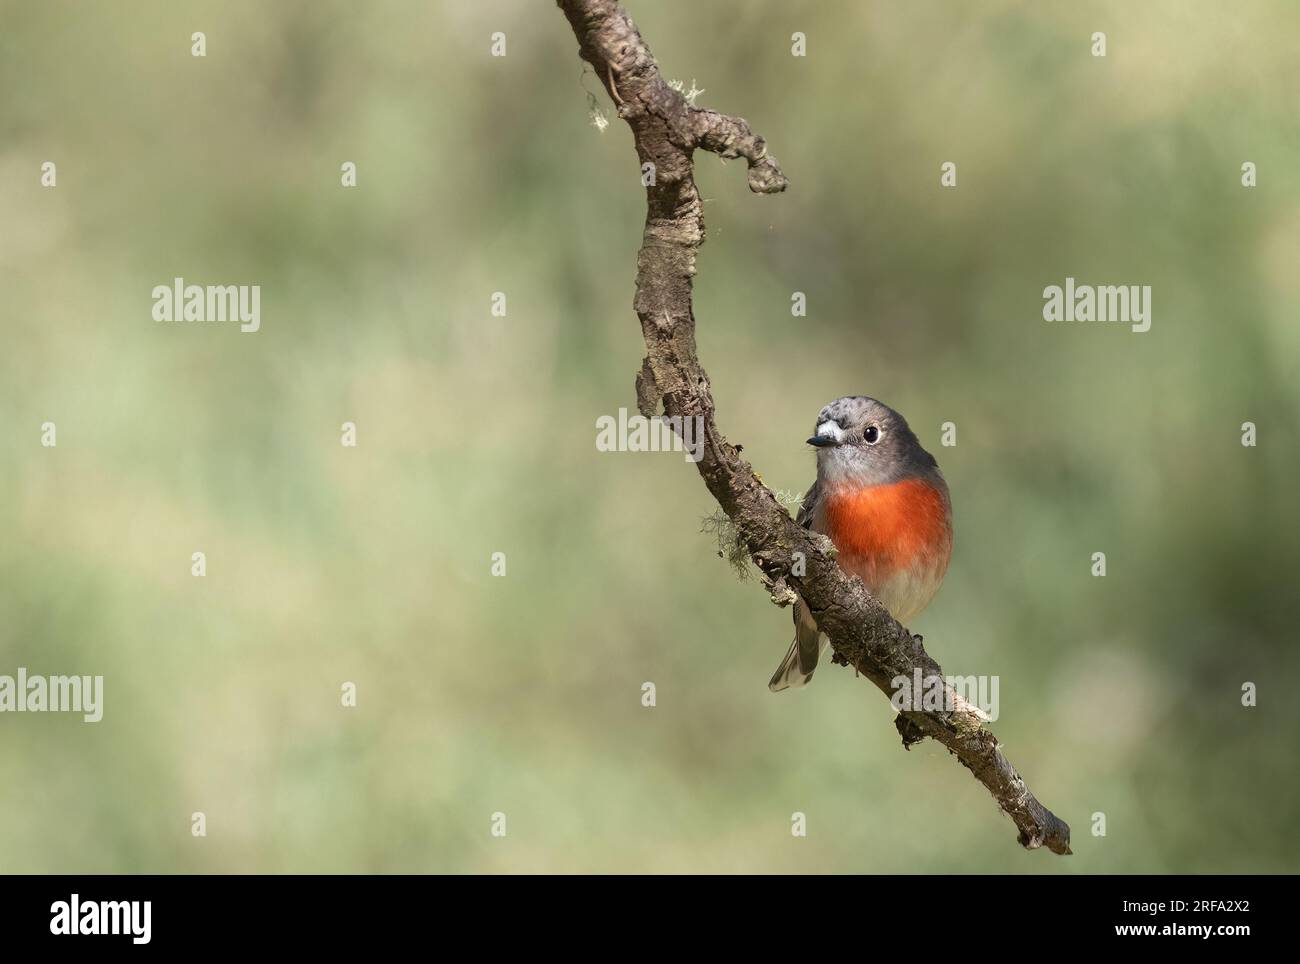 Flame Robin ( Petroica phoenicea ) feed on insects, spiders and other small arthropods. Birds take prey from the ground, Stock Photo